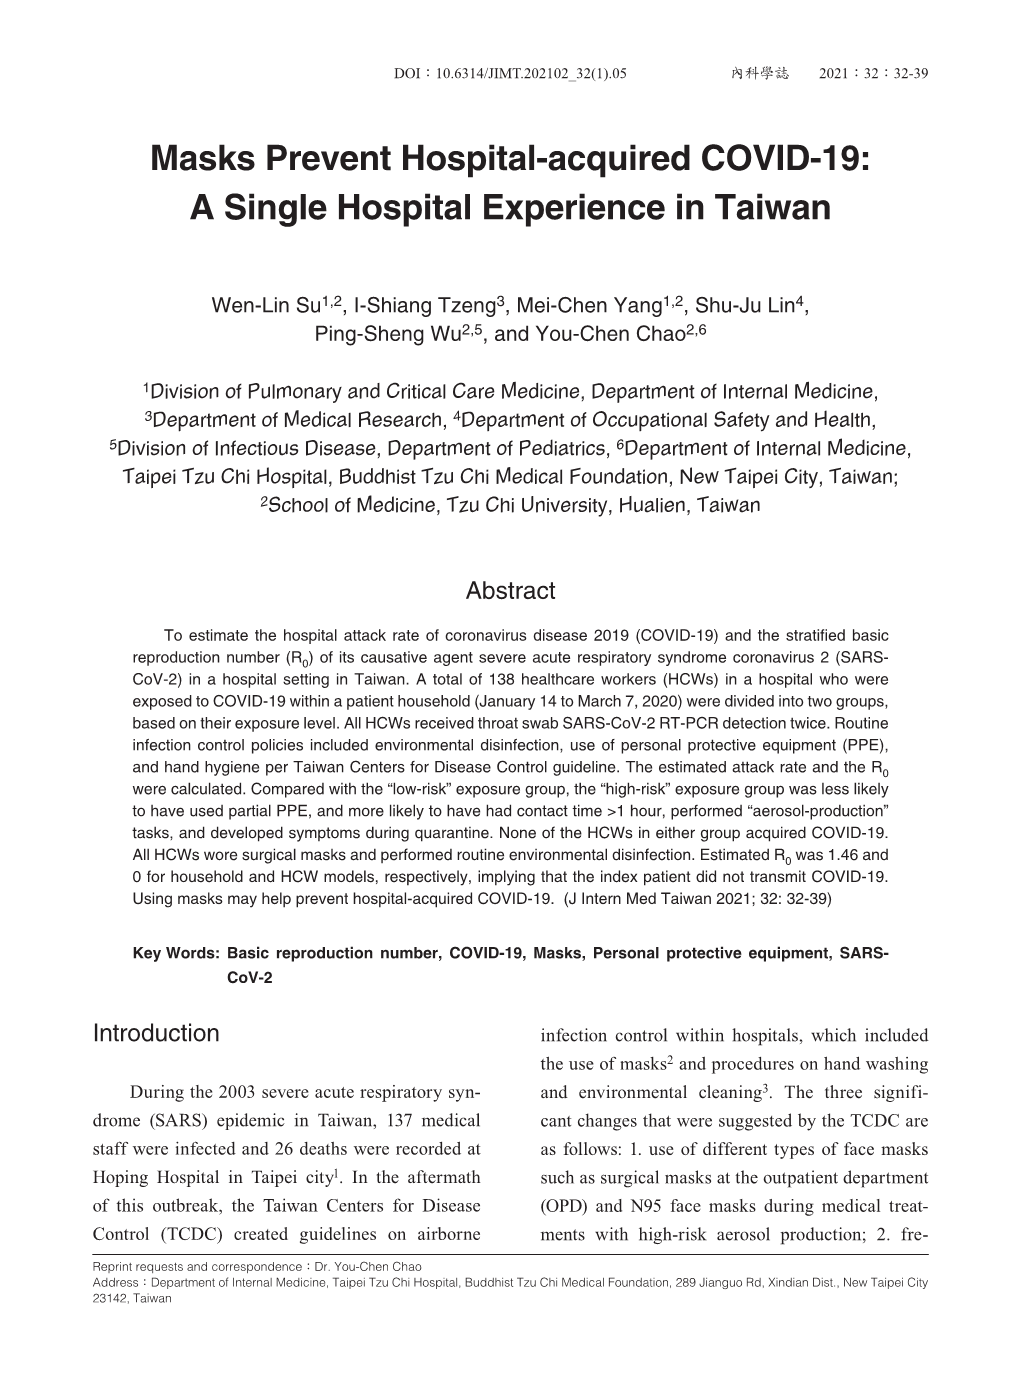 Masks Prevent Hospital-Acquired COVID-19: a Single Hospital Experience in Taiwan